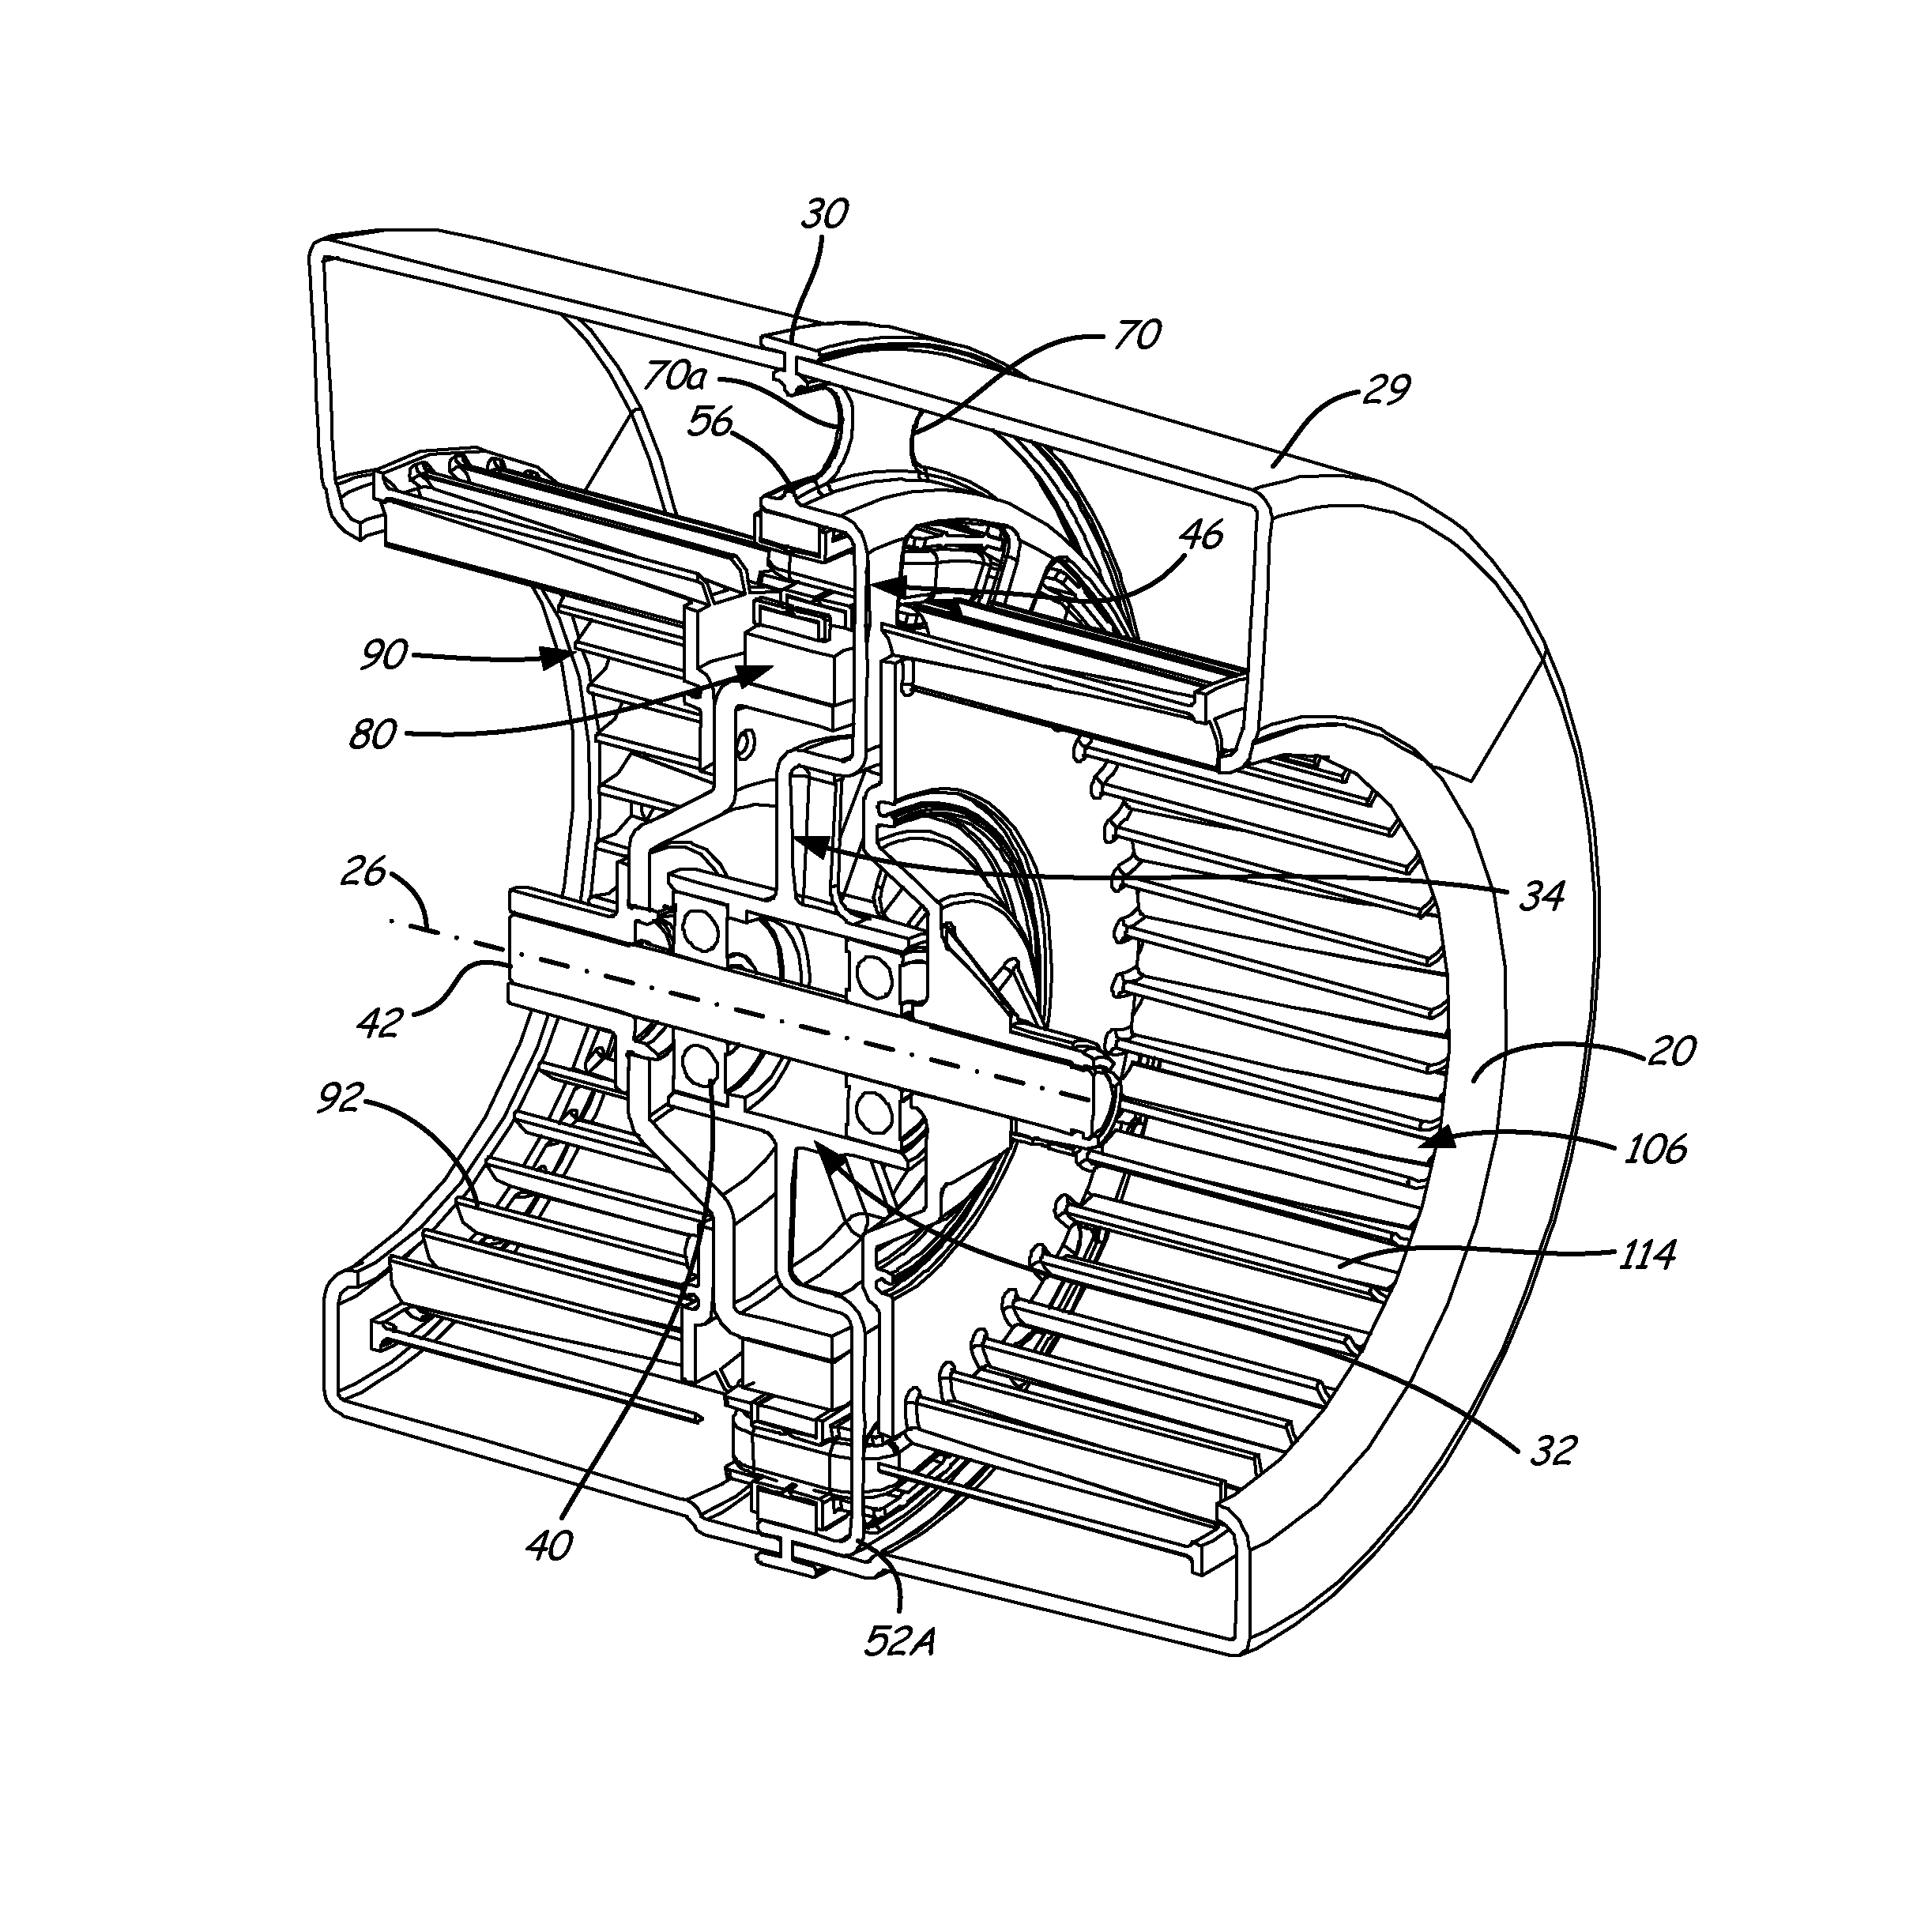 Double inlet centrifugal blower with peripheral motor